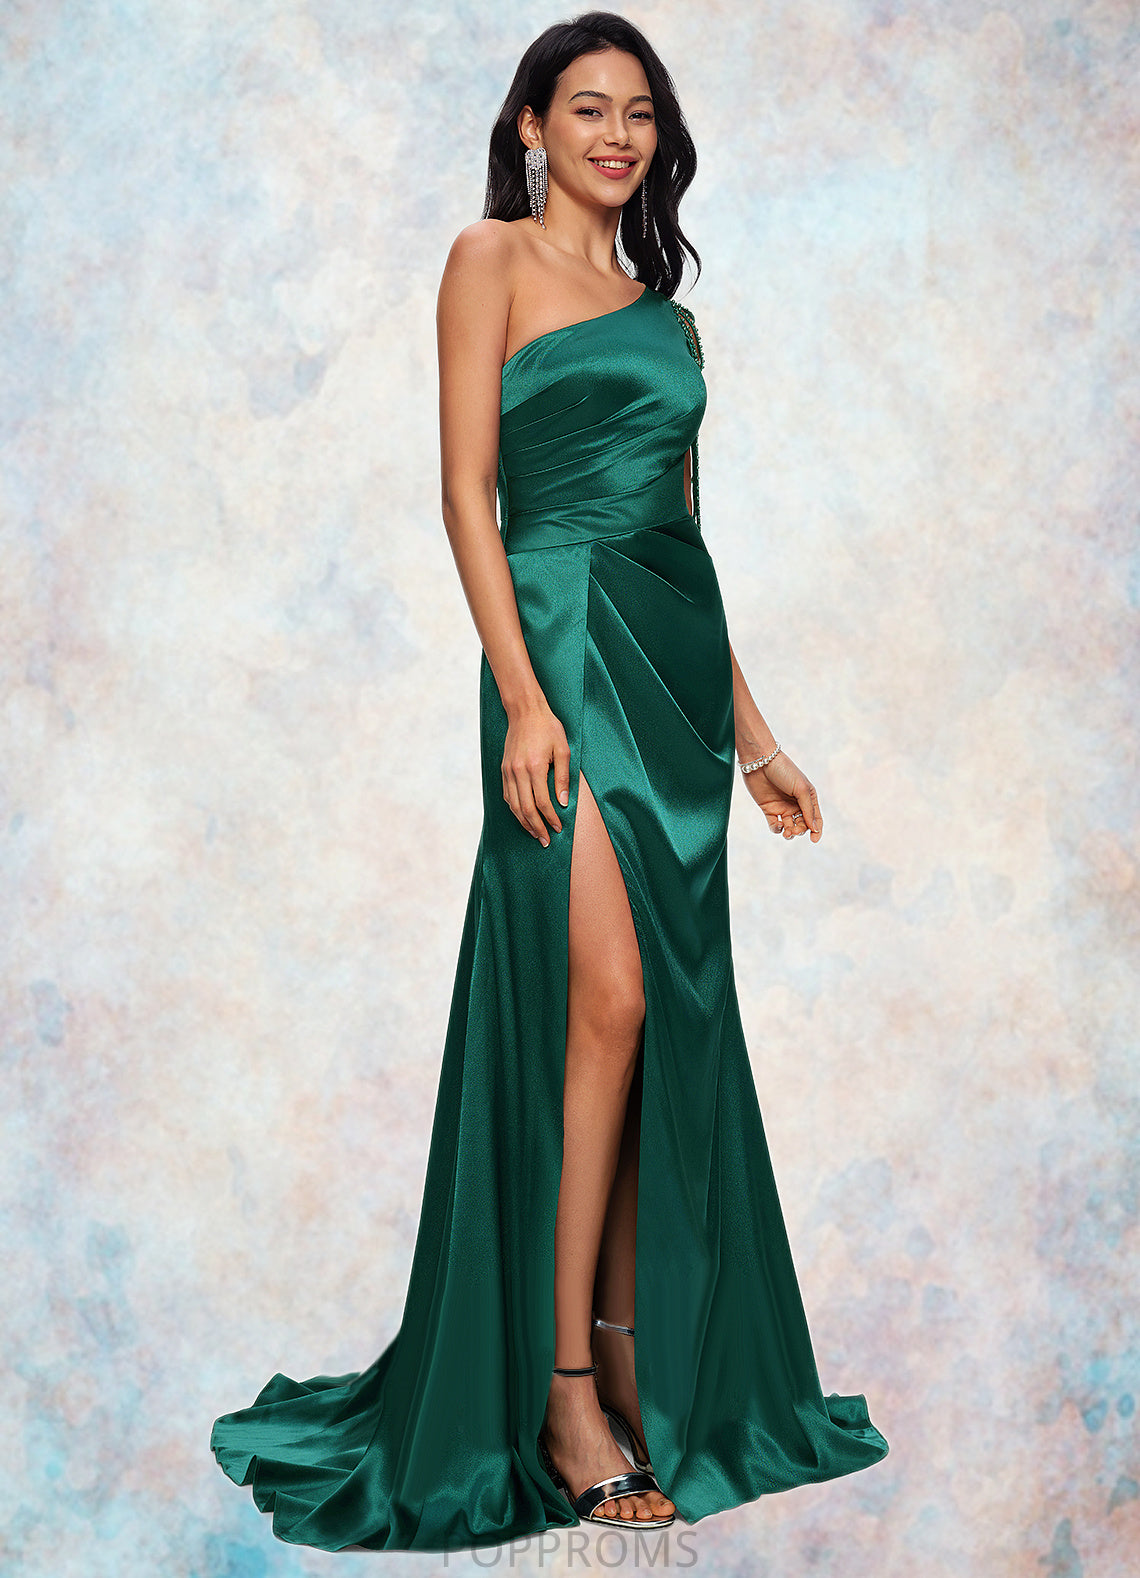 Erin Trumpet/Mermaid One Shoulder Sweep Train Stretch Satin Prom Dresses With Beading PP6P0022205